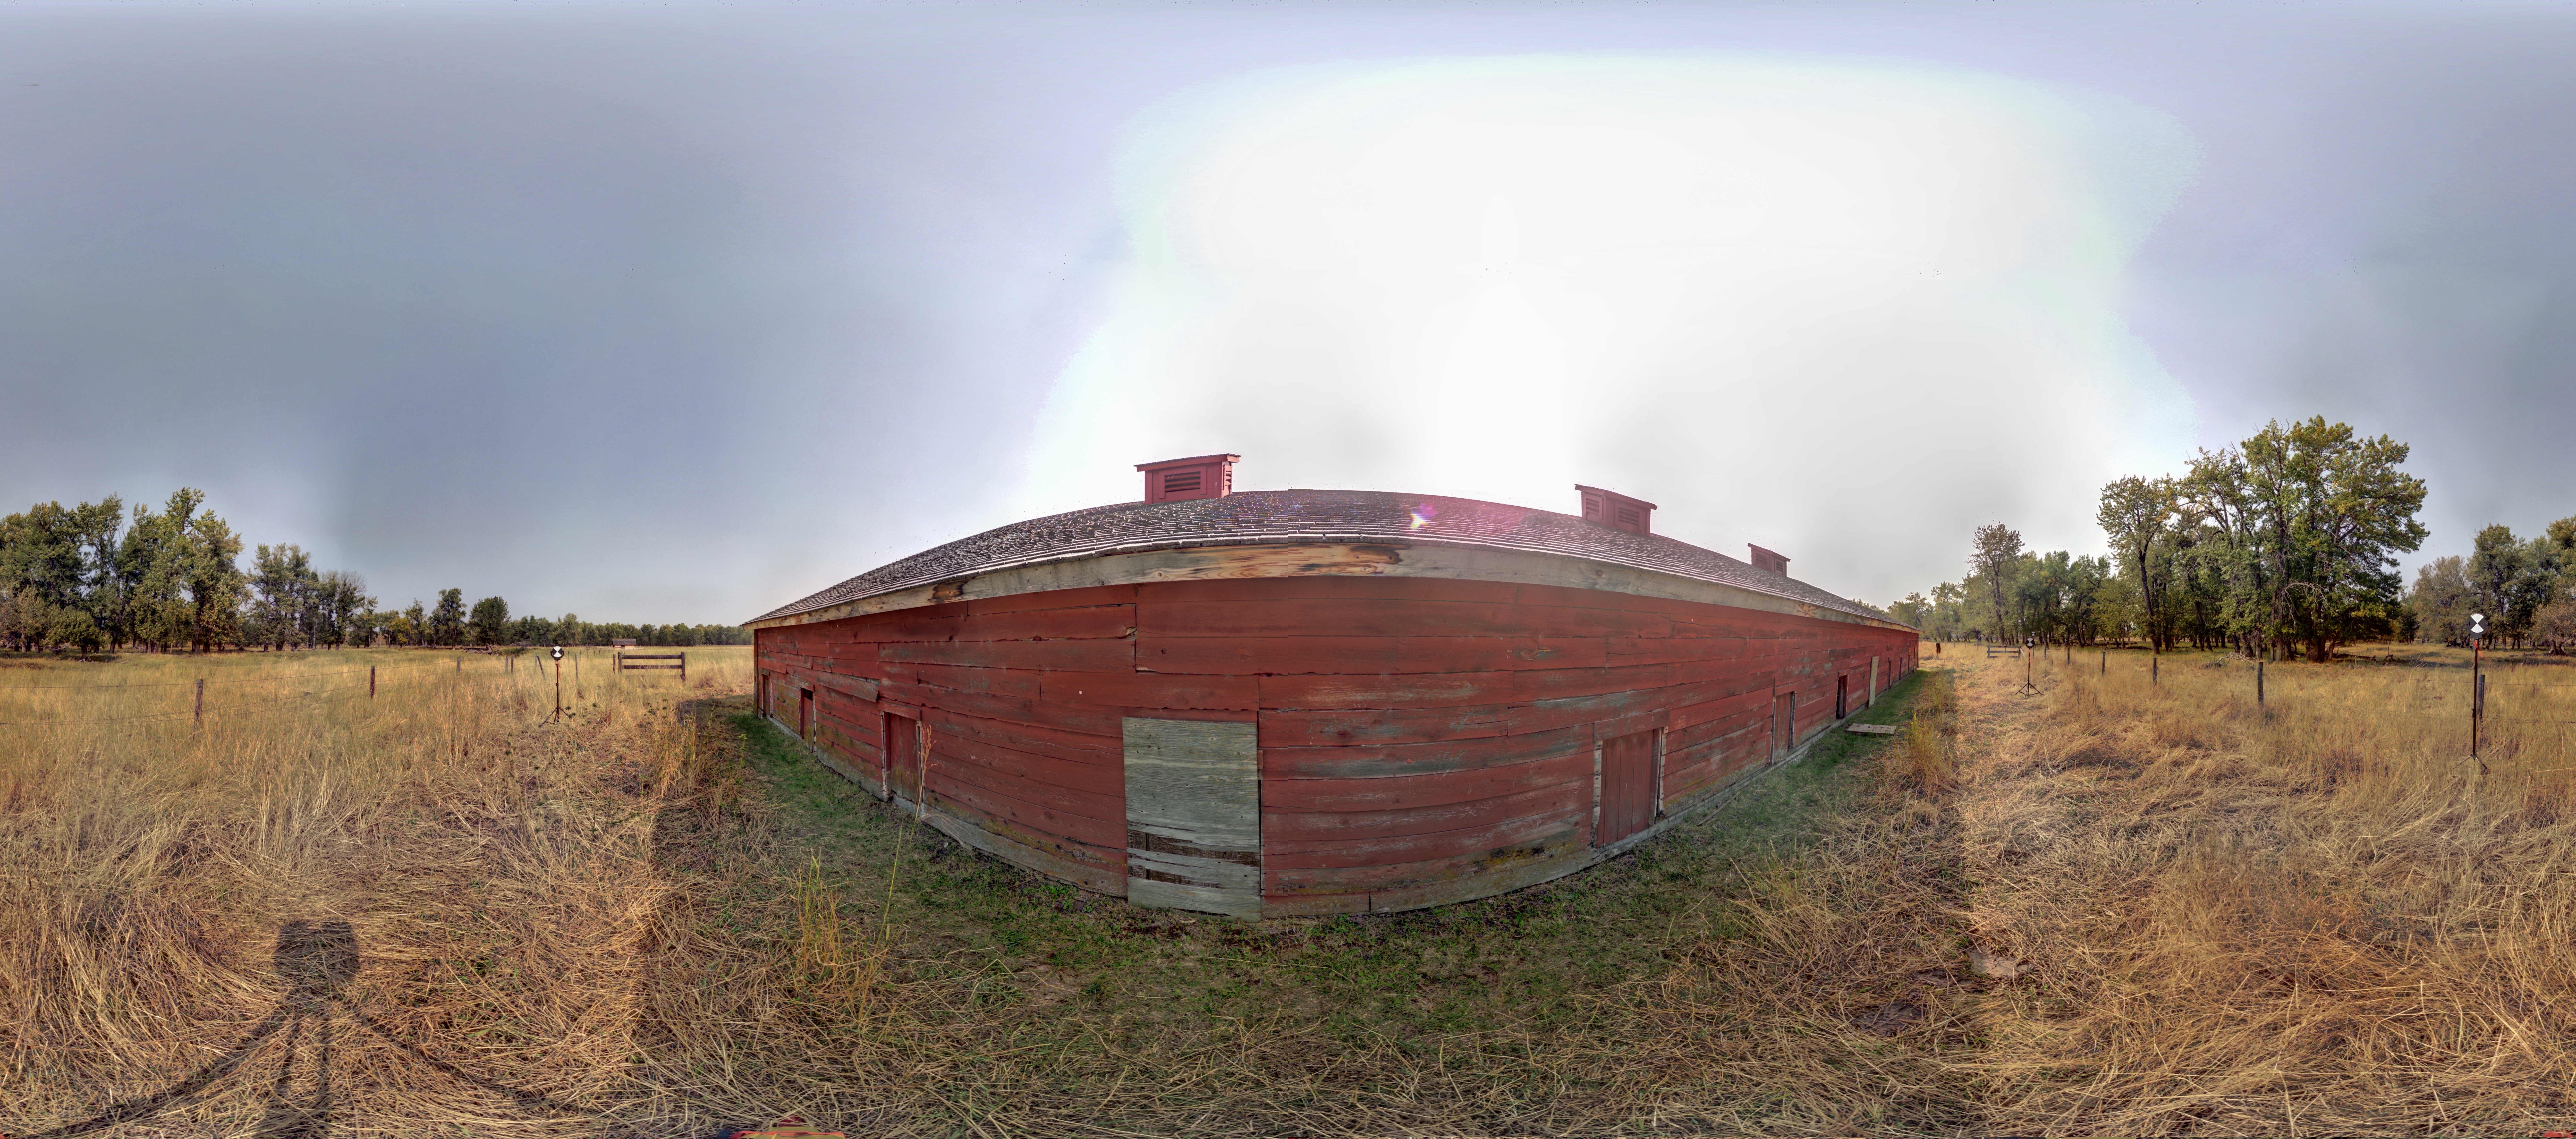 Panoramic image from scan location 20 of the exterior of the Piggery at Bar U Ranch